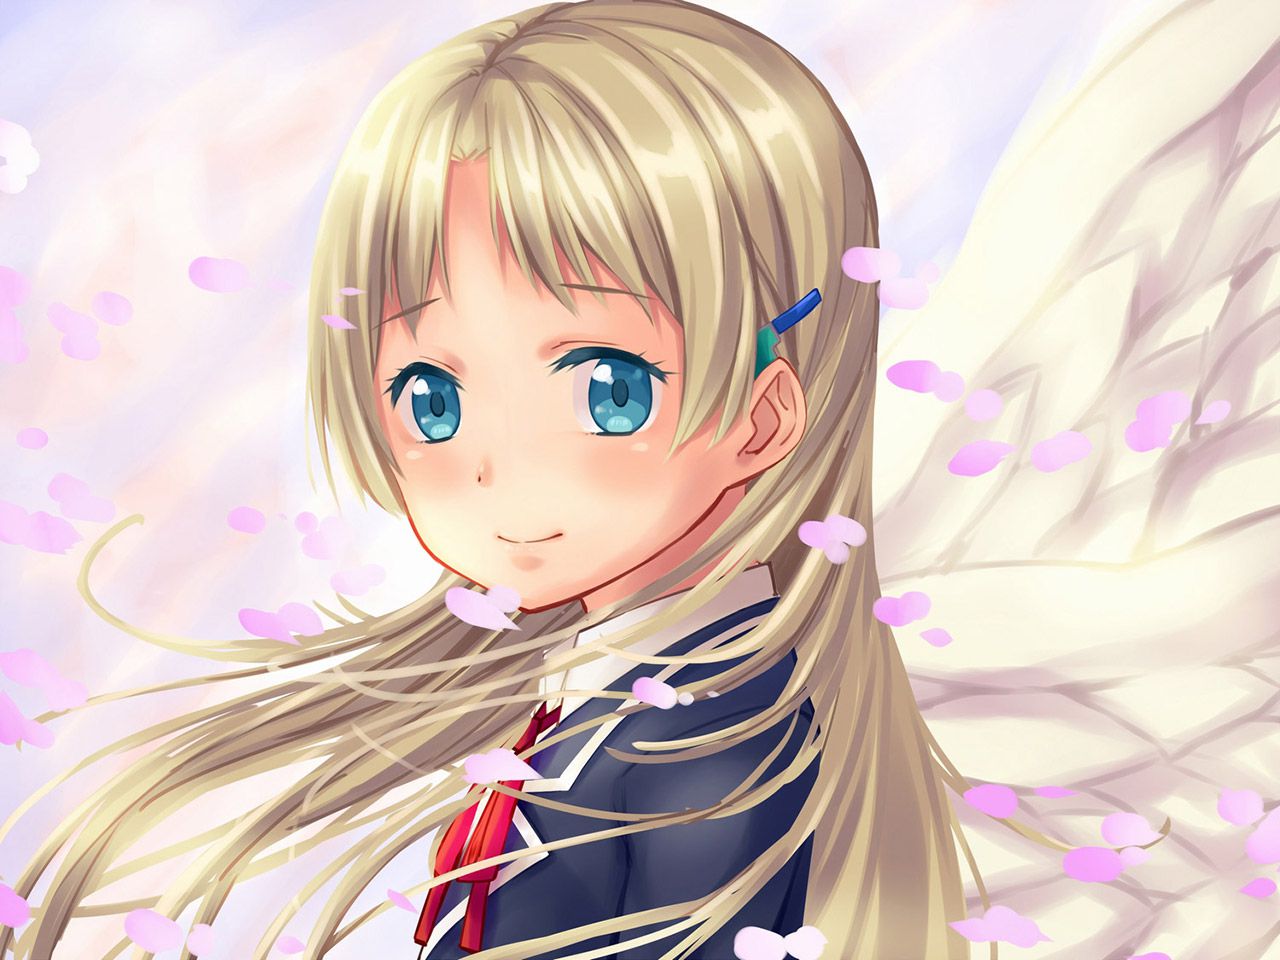 2D Please image of a girl with angel wings 48 photos 38